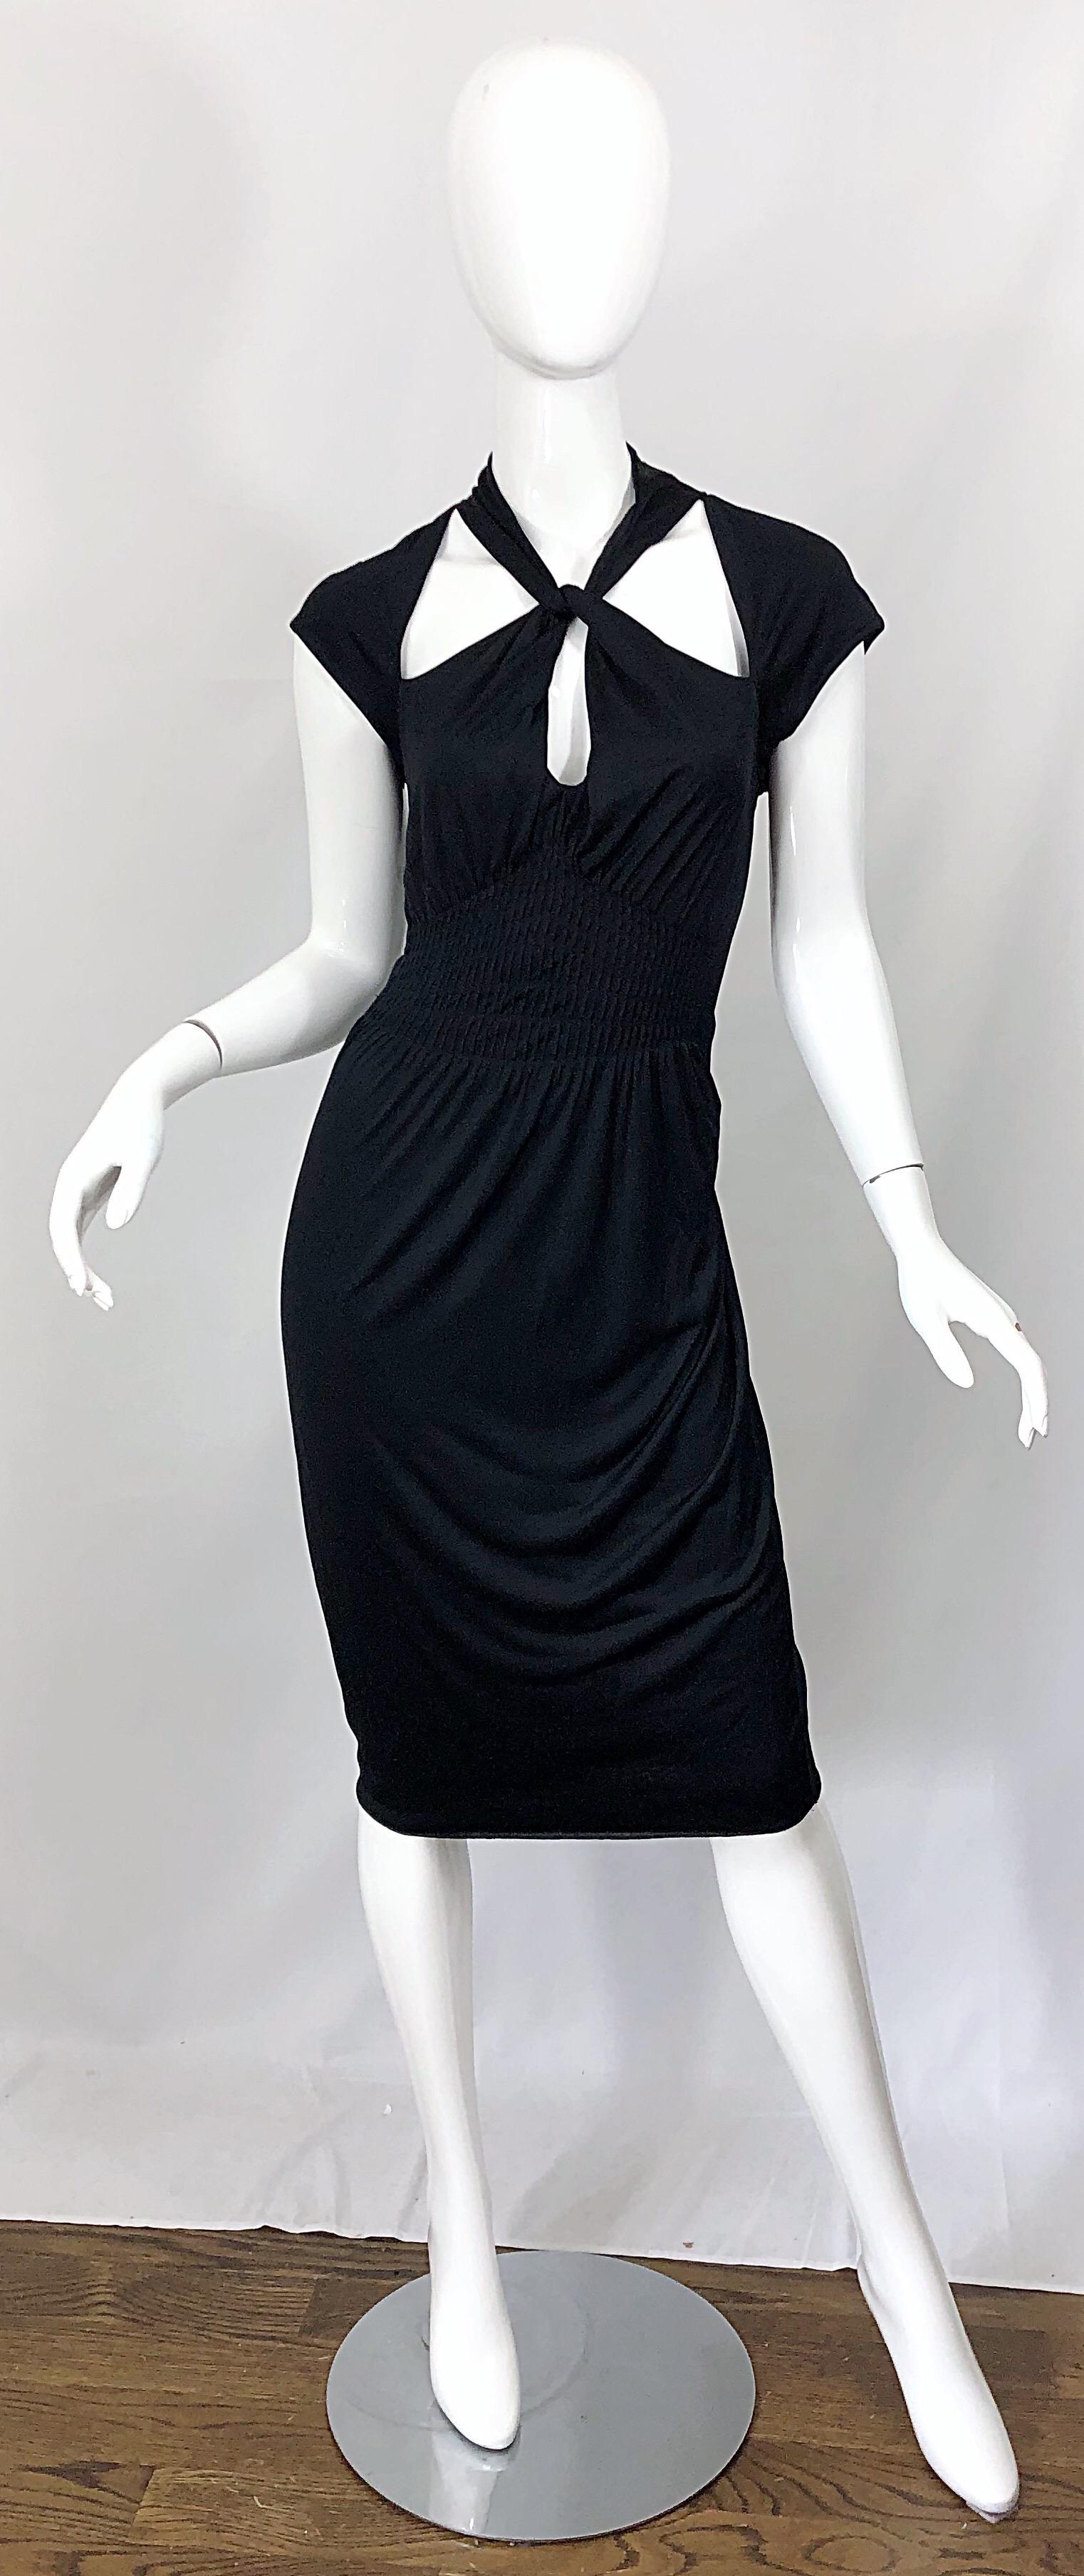 Sexy yet sophisticated GUCCI by TOM FORD Fall 2003 Runway dress! The long sleeve version was seen on Fergie and Naomi Watts for Red Carpet events. Cut-out detail at bodice gives the illusion of wearing a cap sleeve shrug. Halter style neck with a